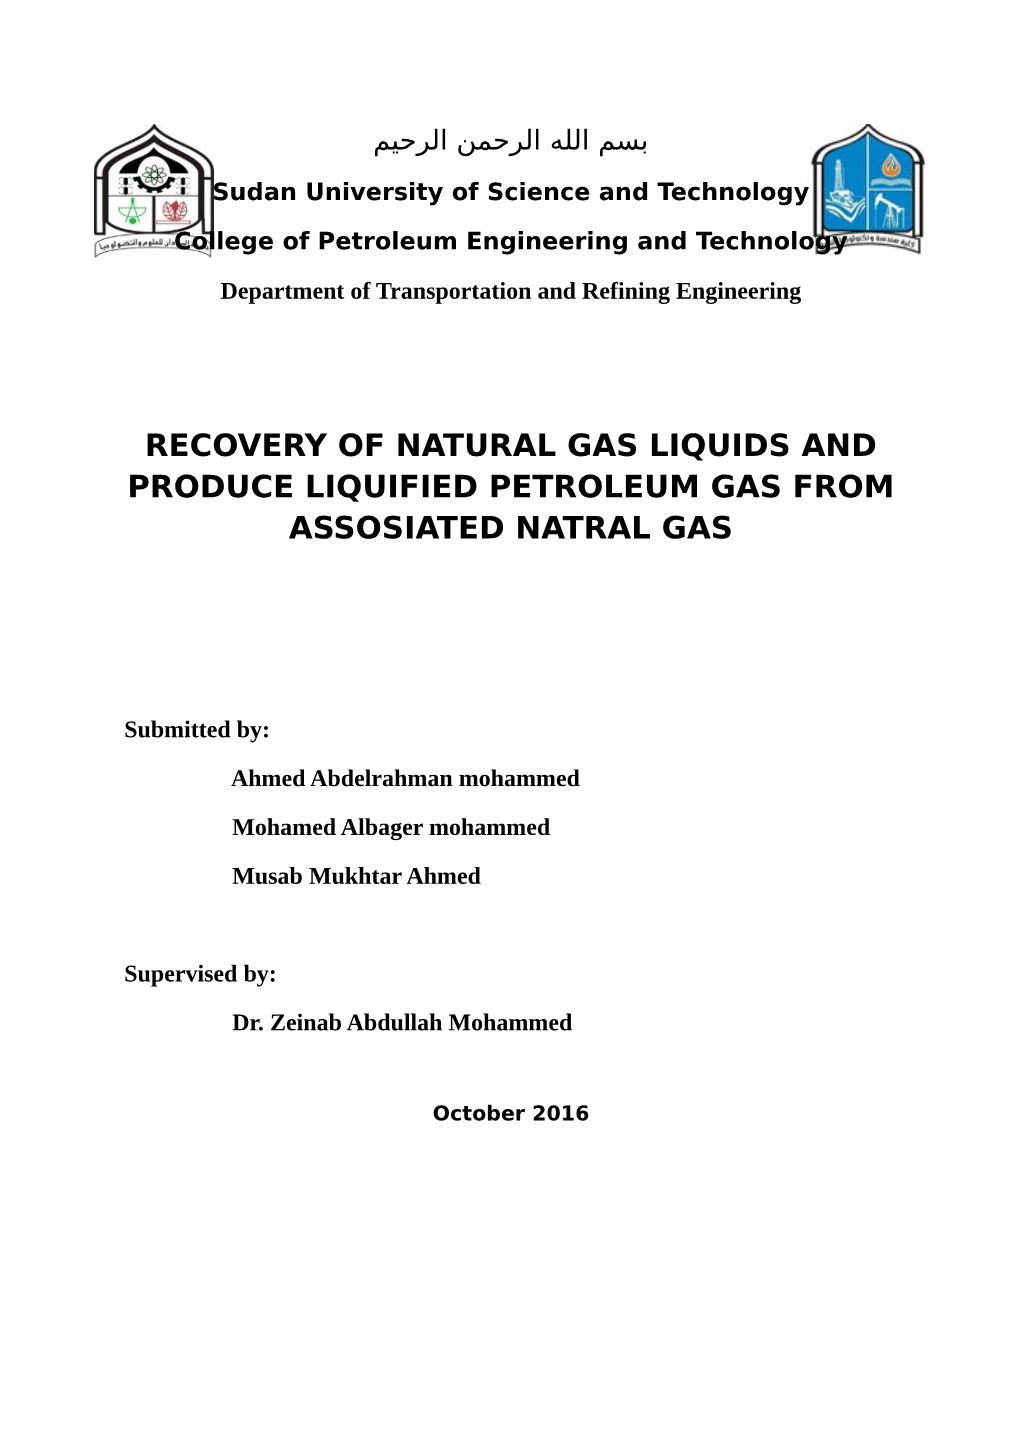 Recovery of Natural Gas Liquids and Produce Liquified Petroleum Gas from Assosiated Natral Gas